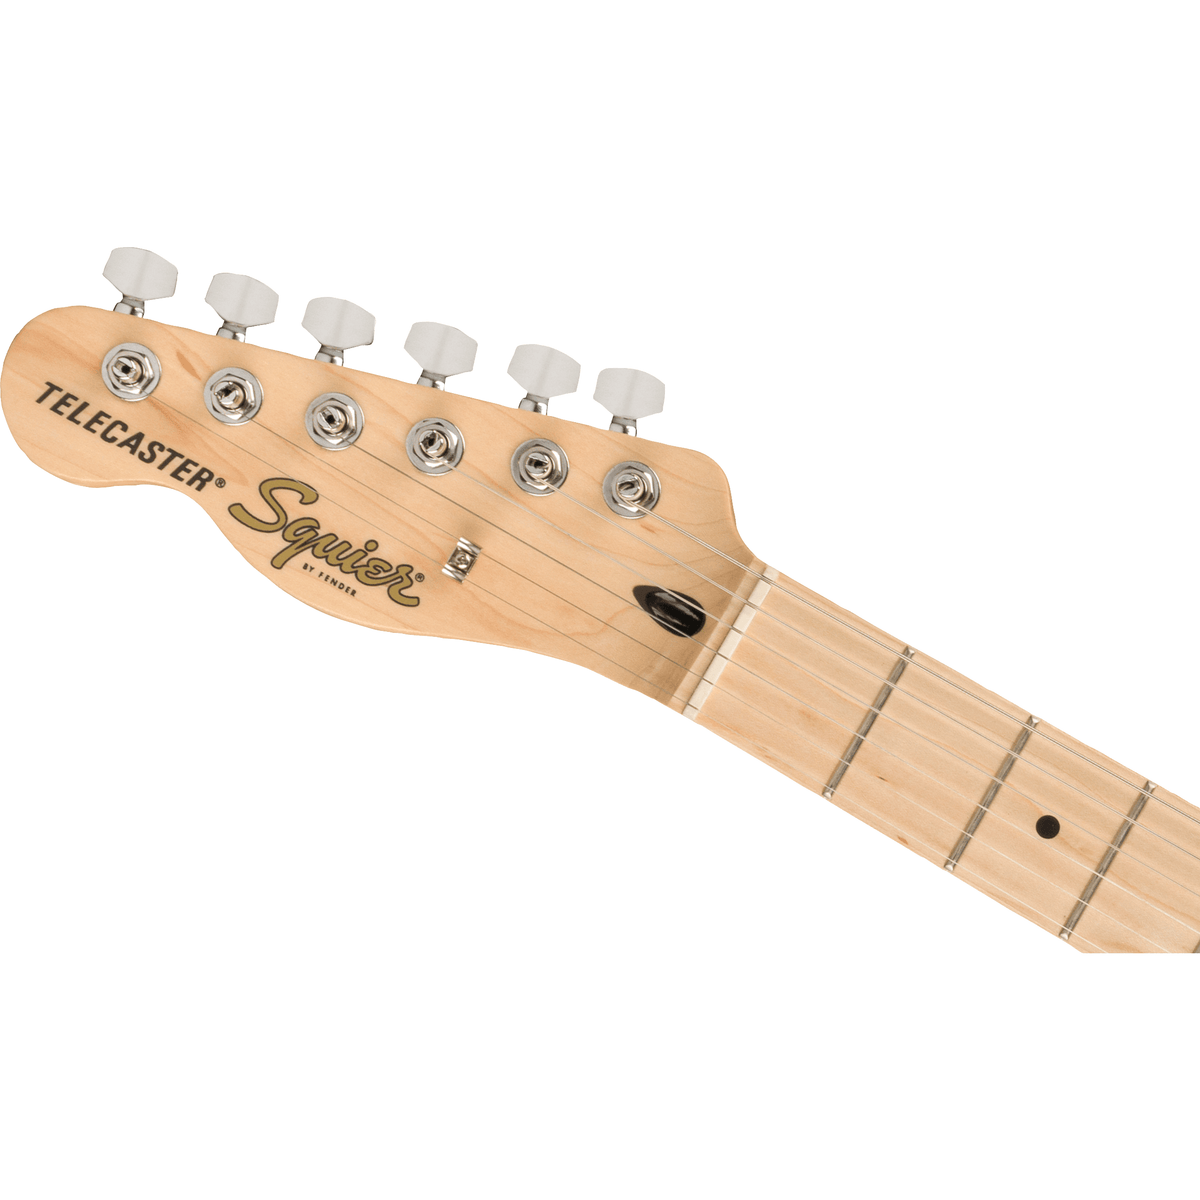 Squier Guitar Fender Squier Affinity Telecaster Left-Handed Butterscotch Blonde Electric Guitar - Byron Music